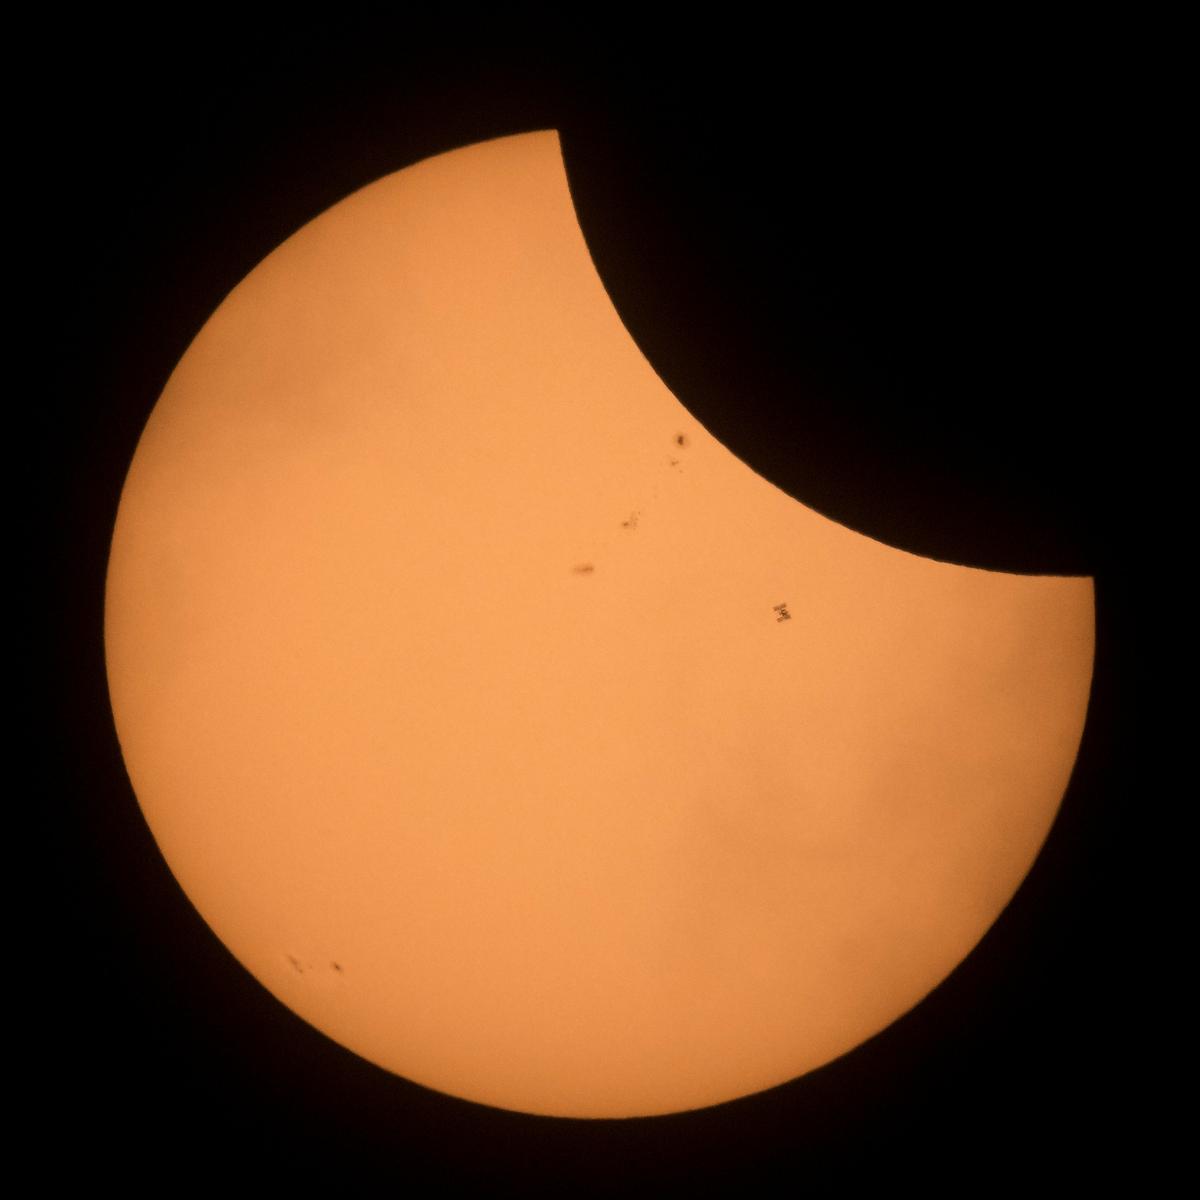 The International Space Station is seen in silhouette as it transits the sun during a partial solar eclipse seen near Banner, Wyoming, U.S., August 21, 2017. Courtesy Joel Kowsky/NASA/Handout via REUTERS